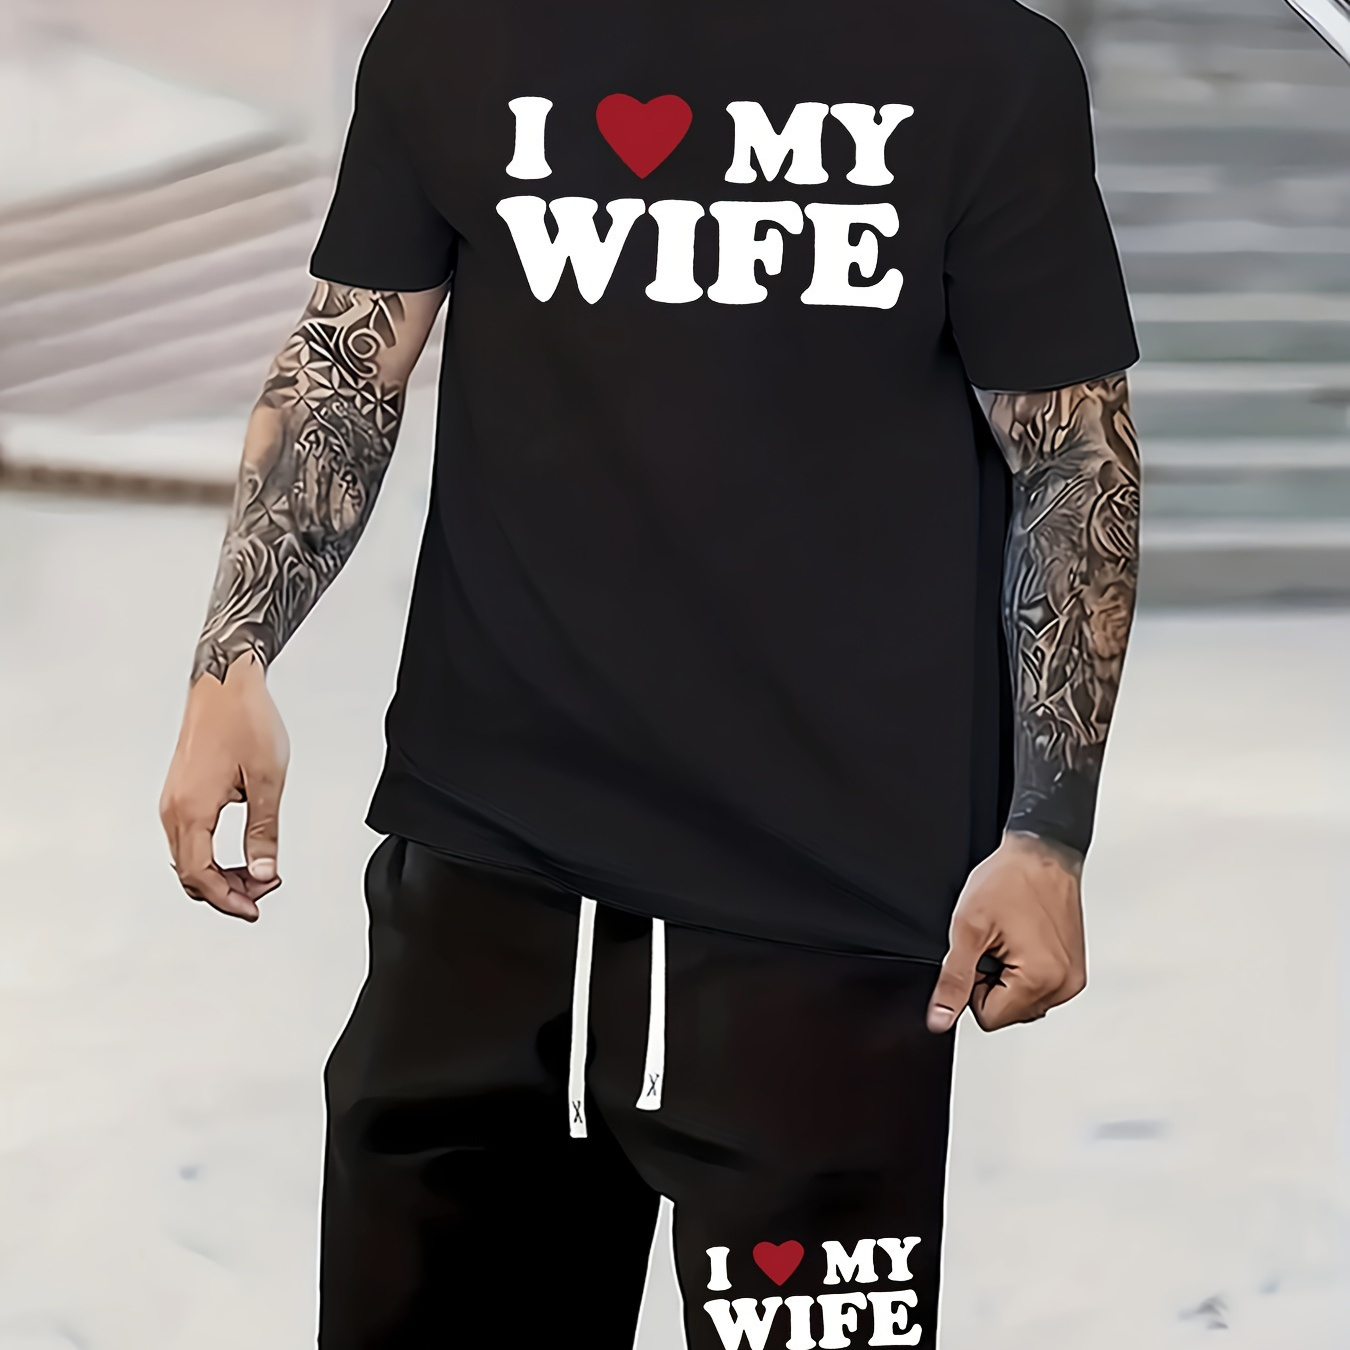 

I Love My Wife Print, Comfortable And Trendy Short Sleeve T-shirt & Simple Shorts Co Ord Set For Men, Breathable And Comfy Summer Clothes, Suitable For Casual Time